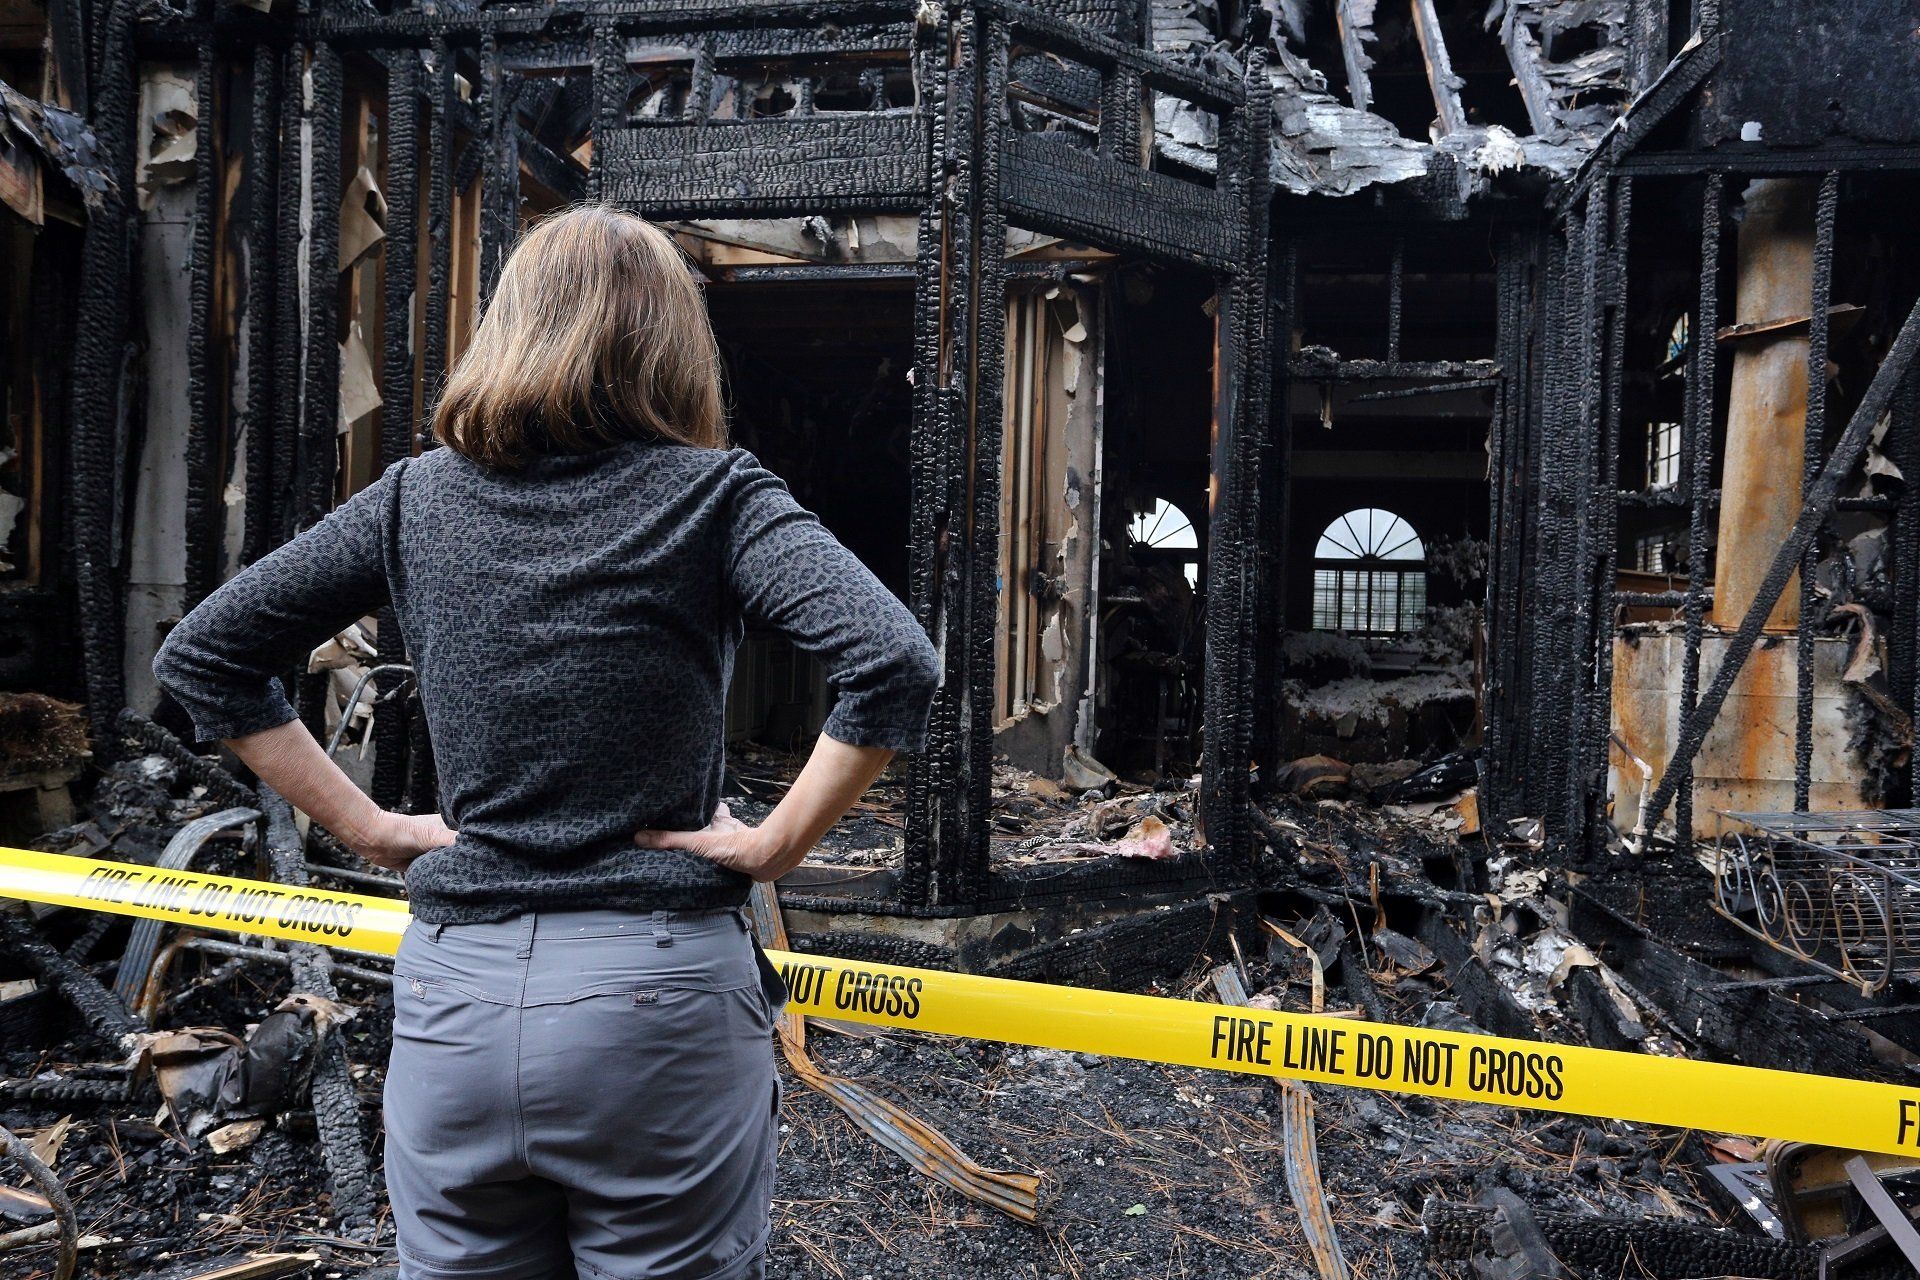 Fire Damage Insurance Claims Tips & Advice for Dealing with a Claim